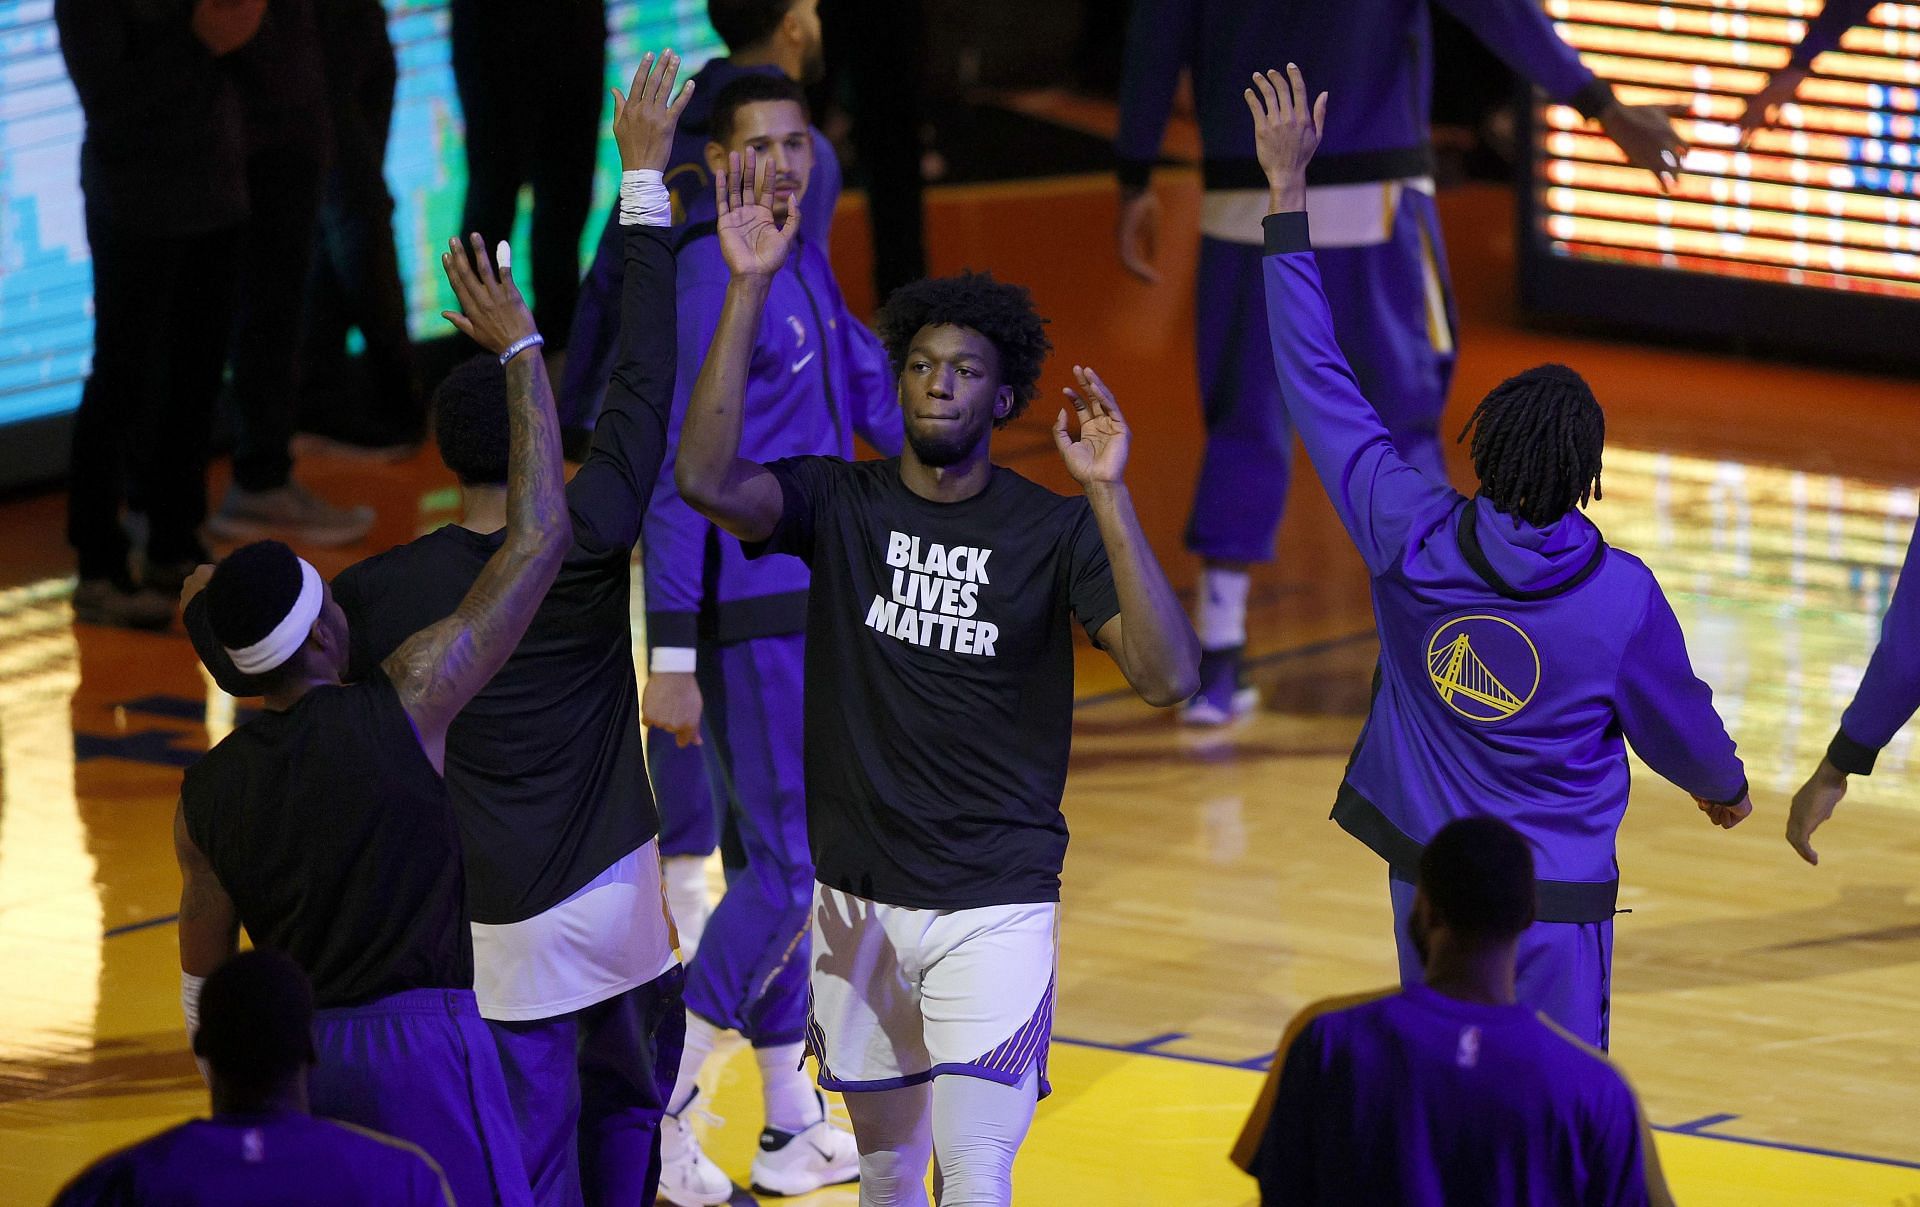 James Wiseman #33 of the Golden State Warriors walks onto the court for player introductions before their game against the Toronto Raptors at Chase Center on January 10, 2021 